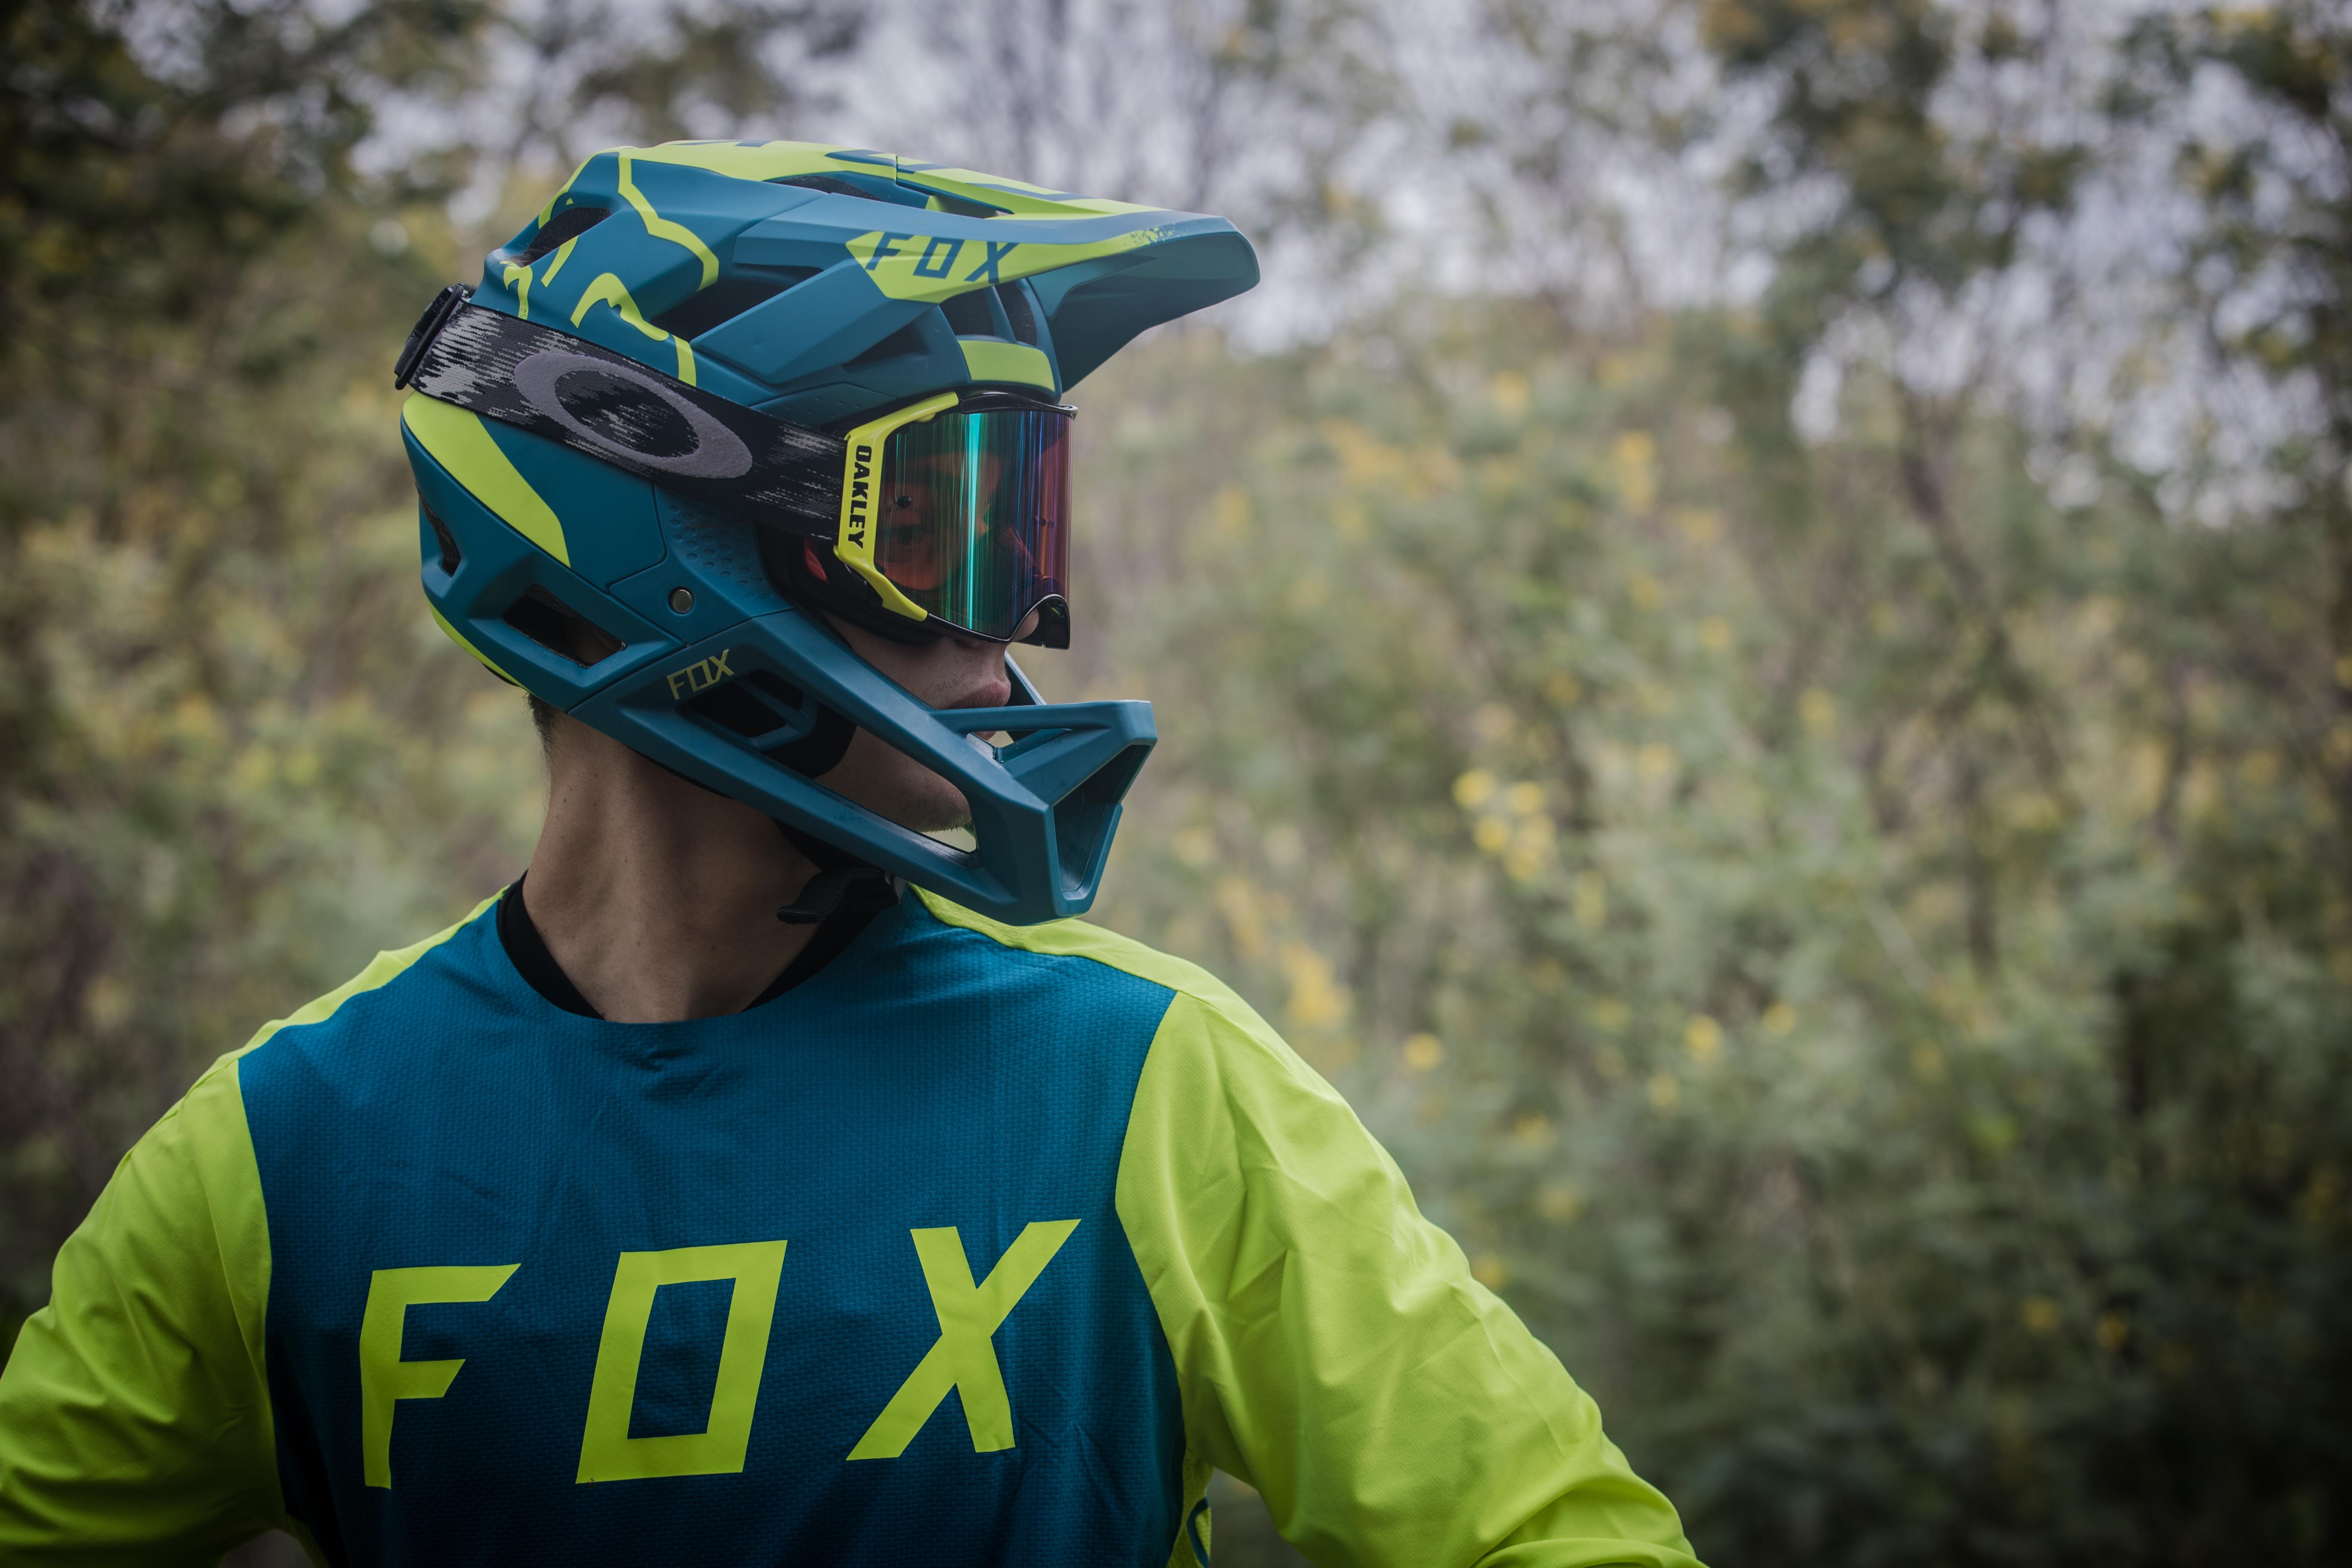 Fox Proframe all-mountain helmet is full face, full time | Bicycle Retailer and ...5472 x 3648